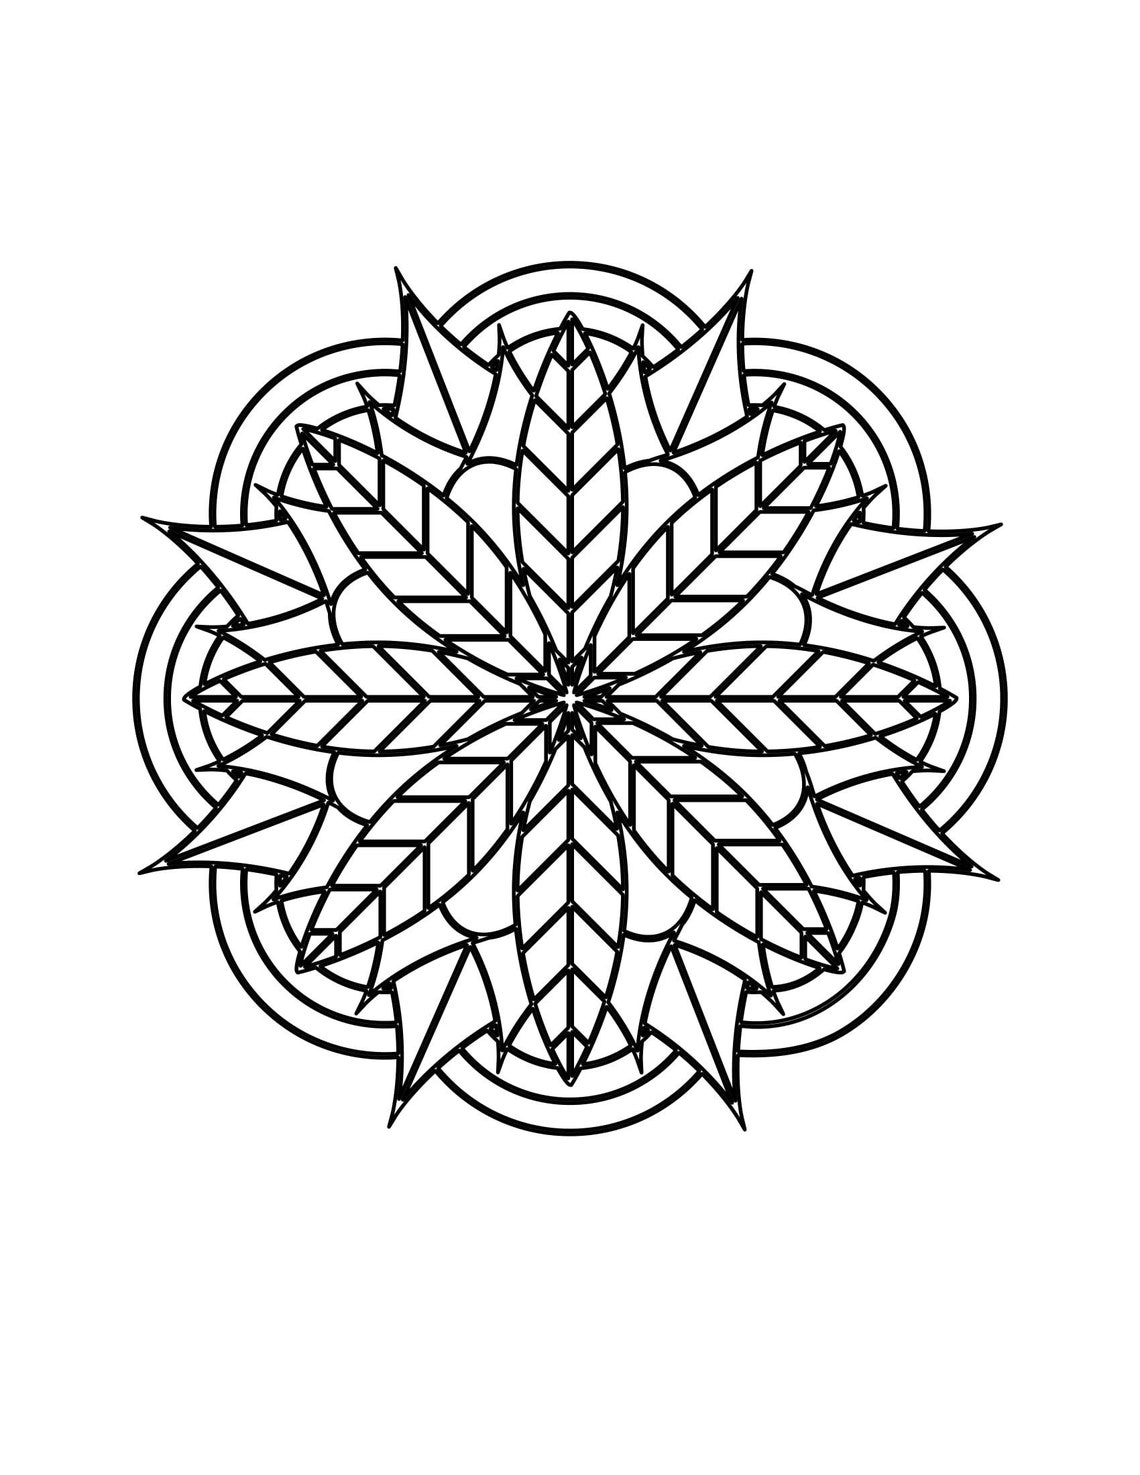 223 Cute Mandala Coloring Pages For Beginners with disney character